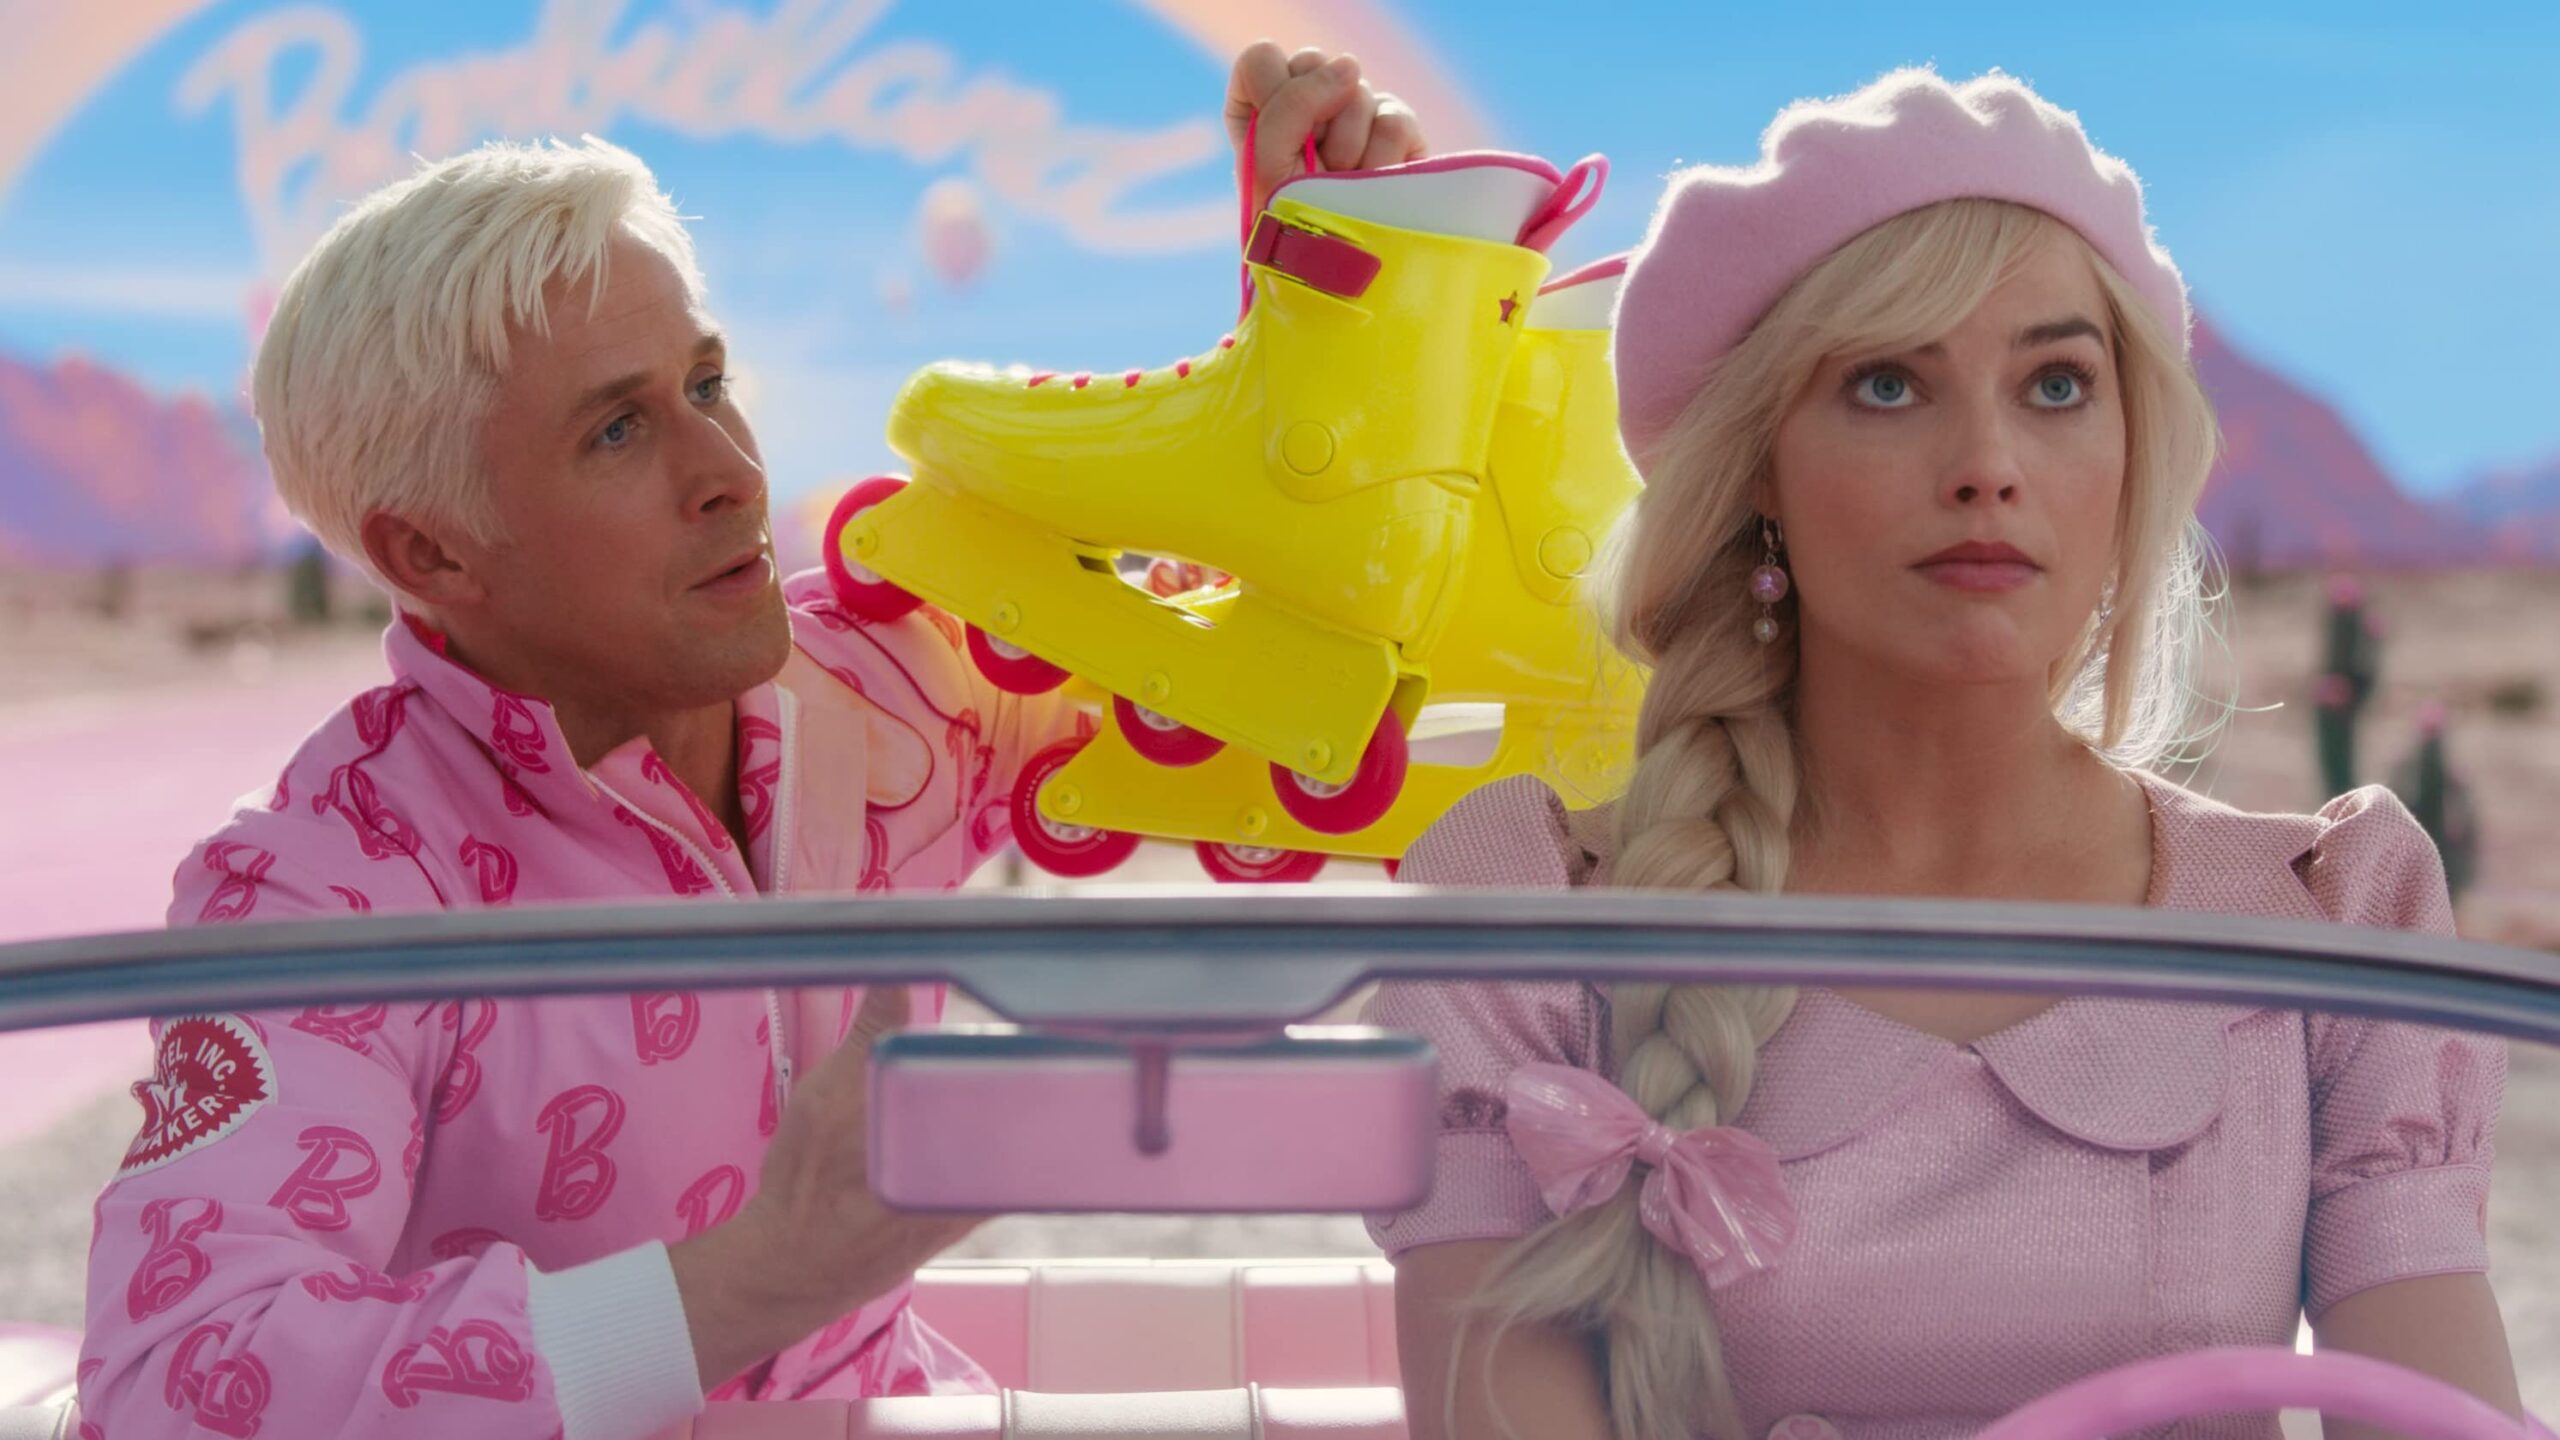 Is The New 'Barbie' Movie Appropriate For Kids? A Guide For Parents